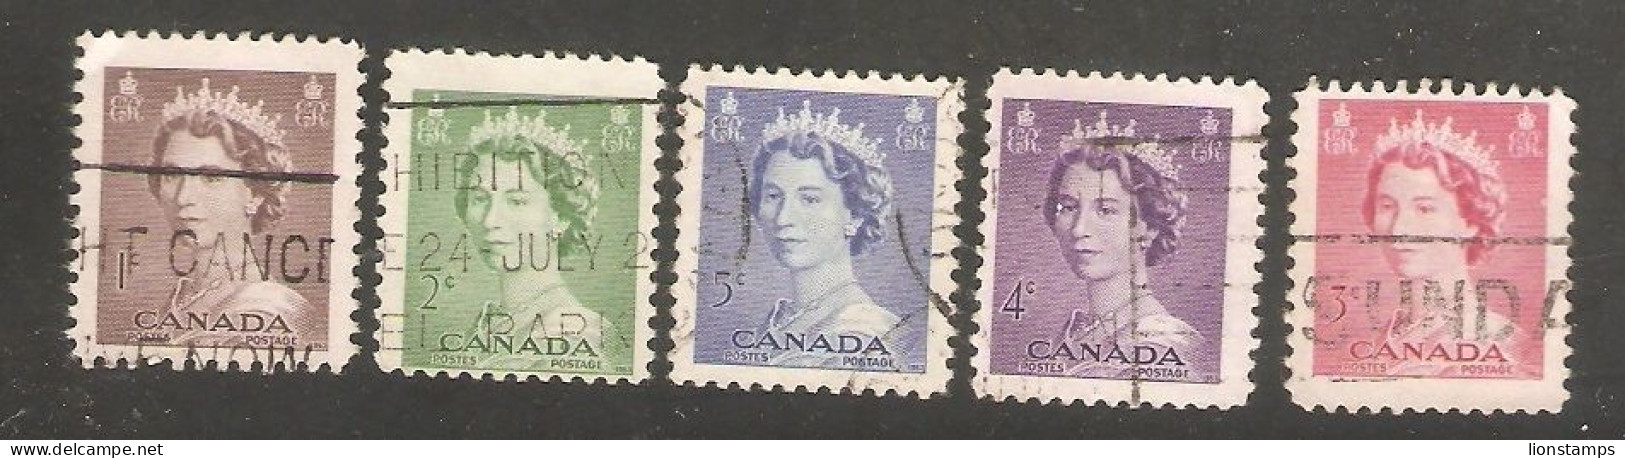 Canada - Scott 325-329 - Used Stamps